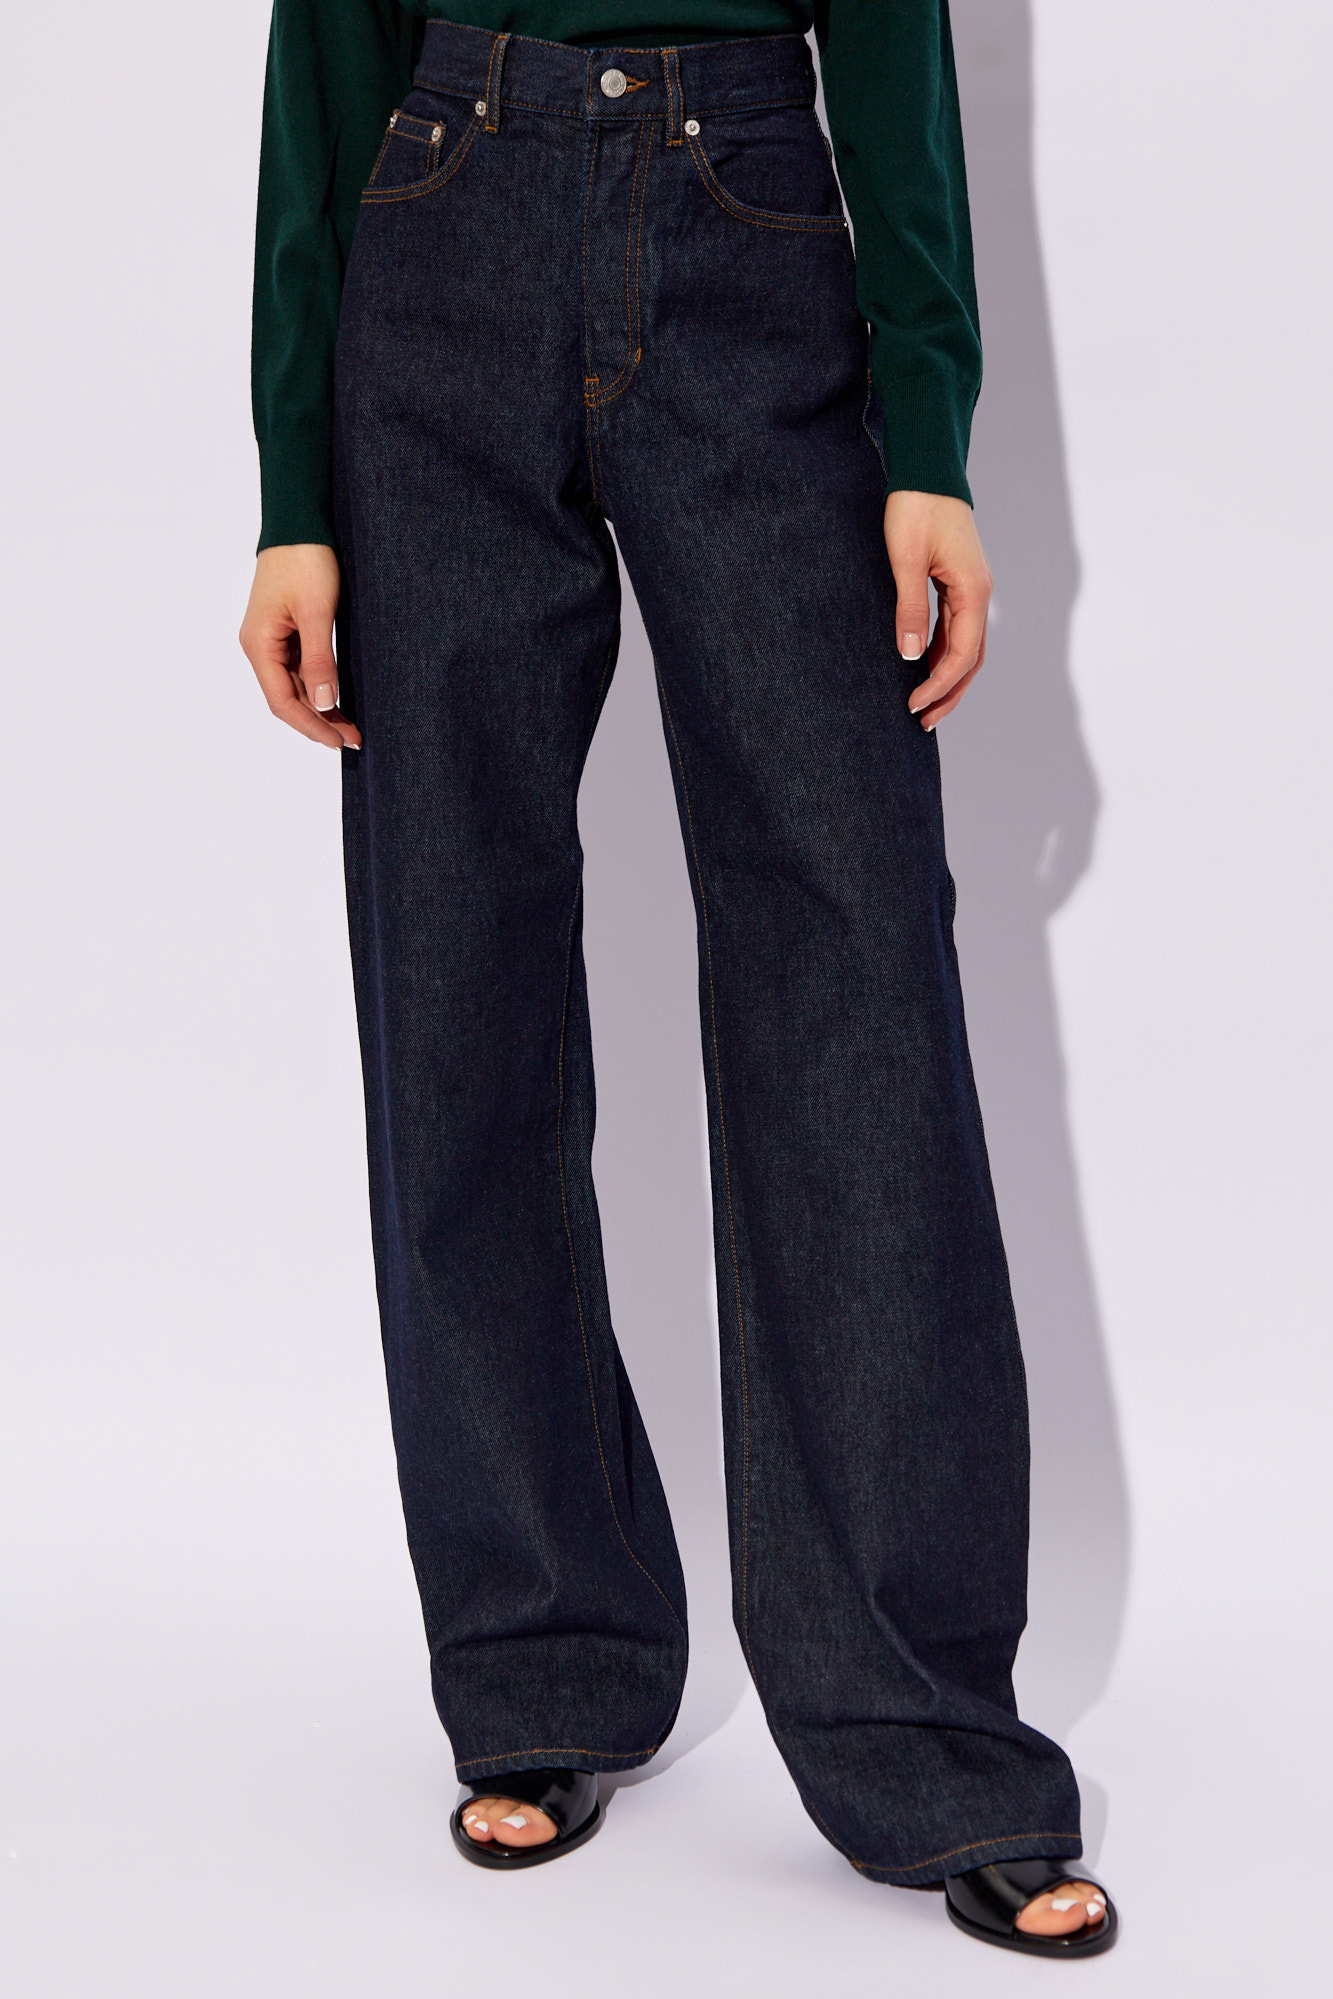 Dries Van Noten High-rise jeans with wide legs